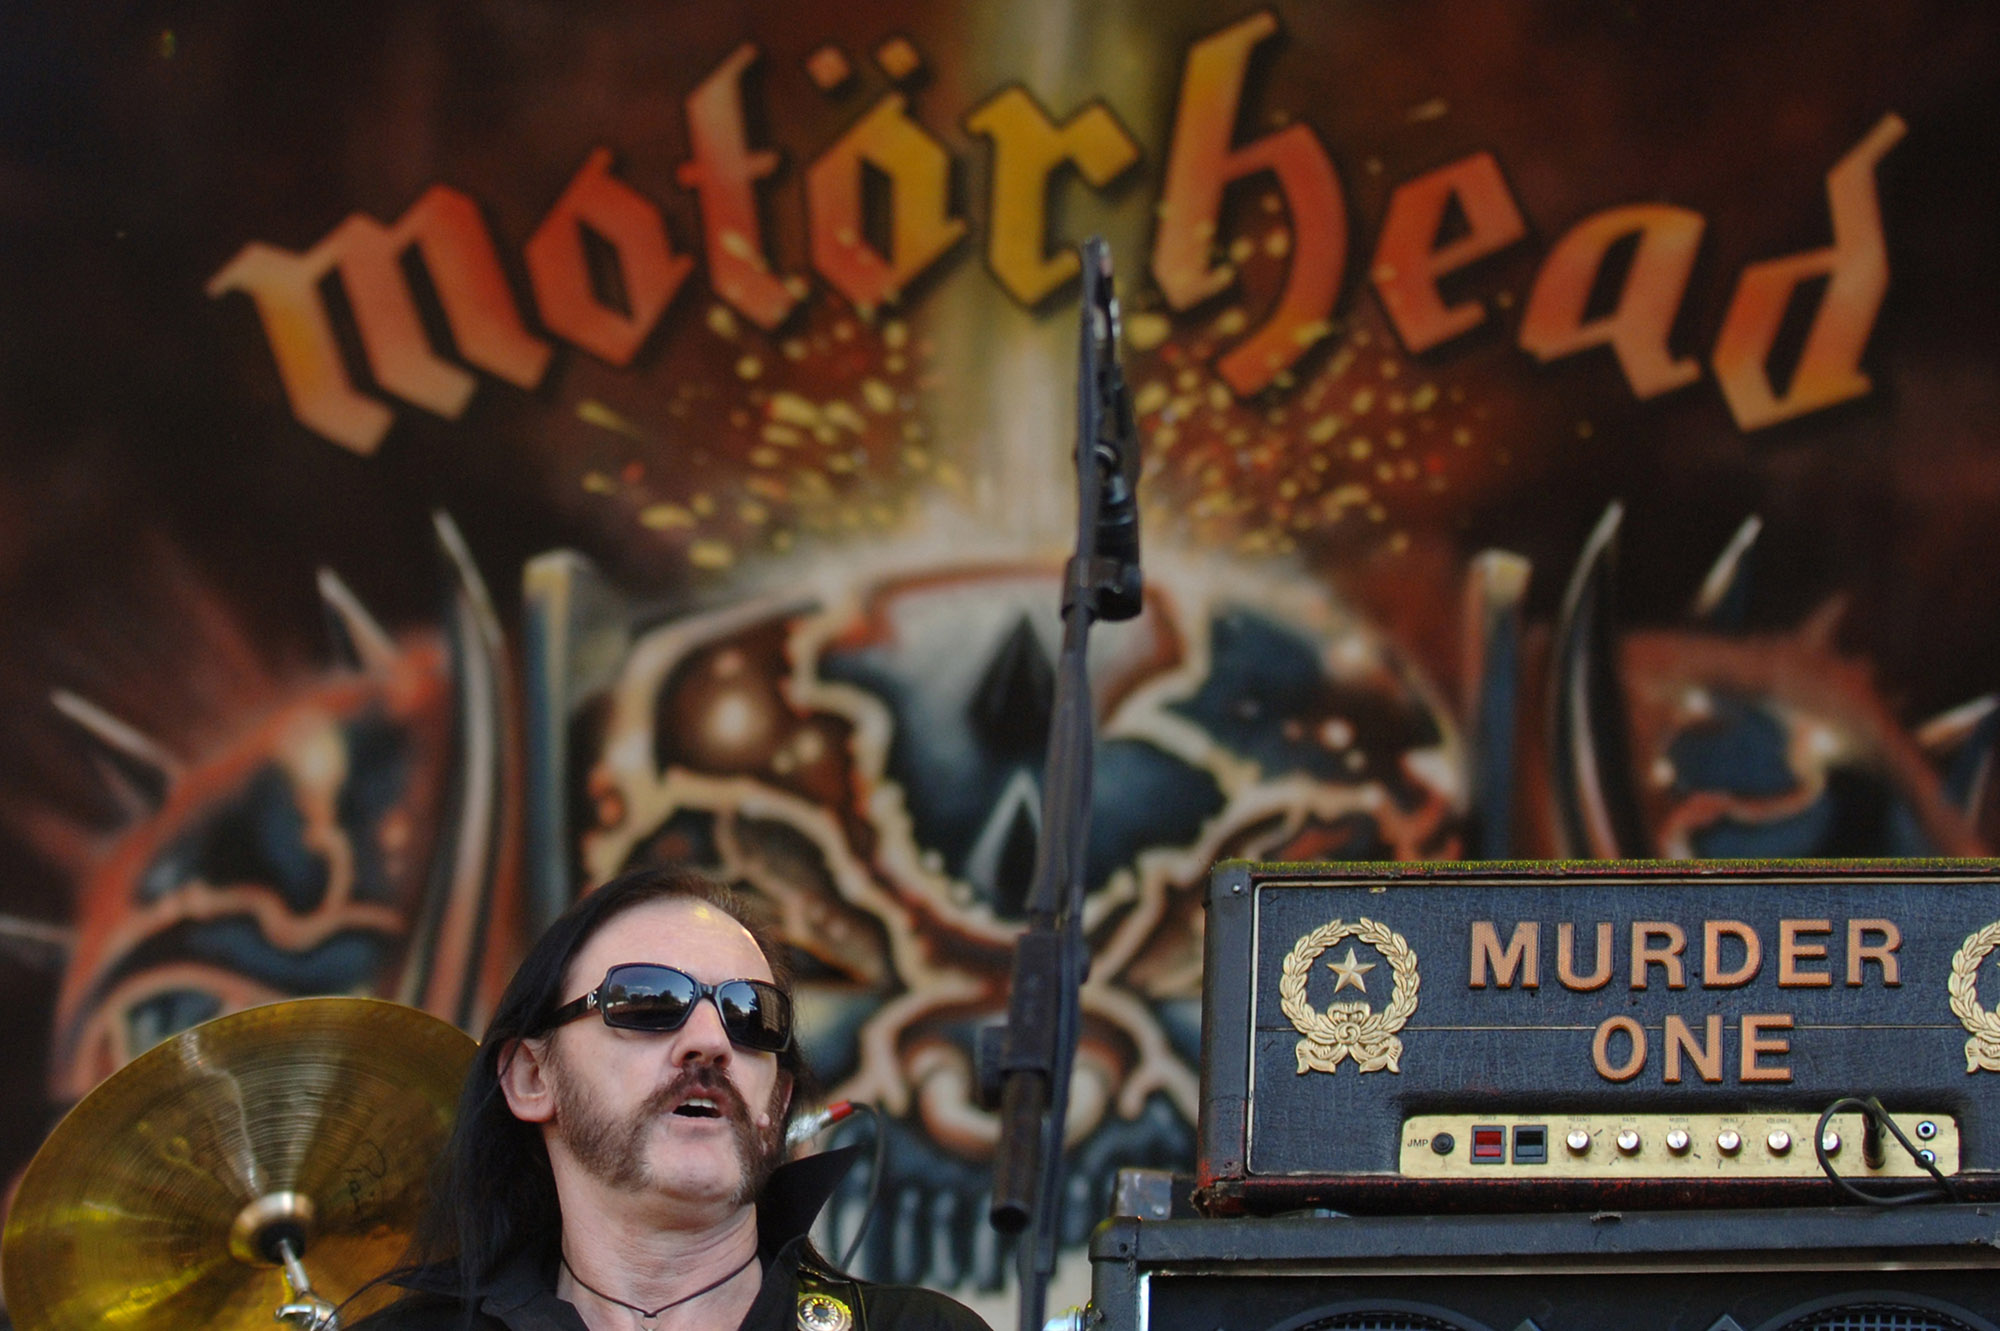 Italy Milan , 4th and 3rd June 2006 "Gods of Metal 2006" at the Idroscalo of Milan: Motorhead singer, bassist and historical leader Lemmy Kilmister during the concert